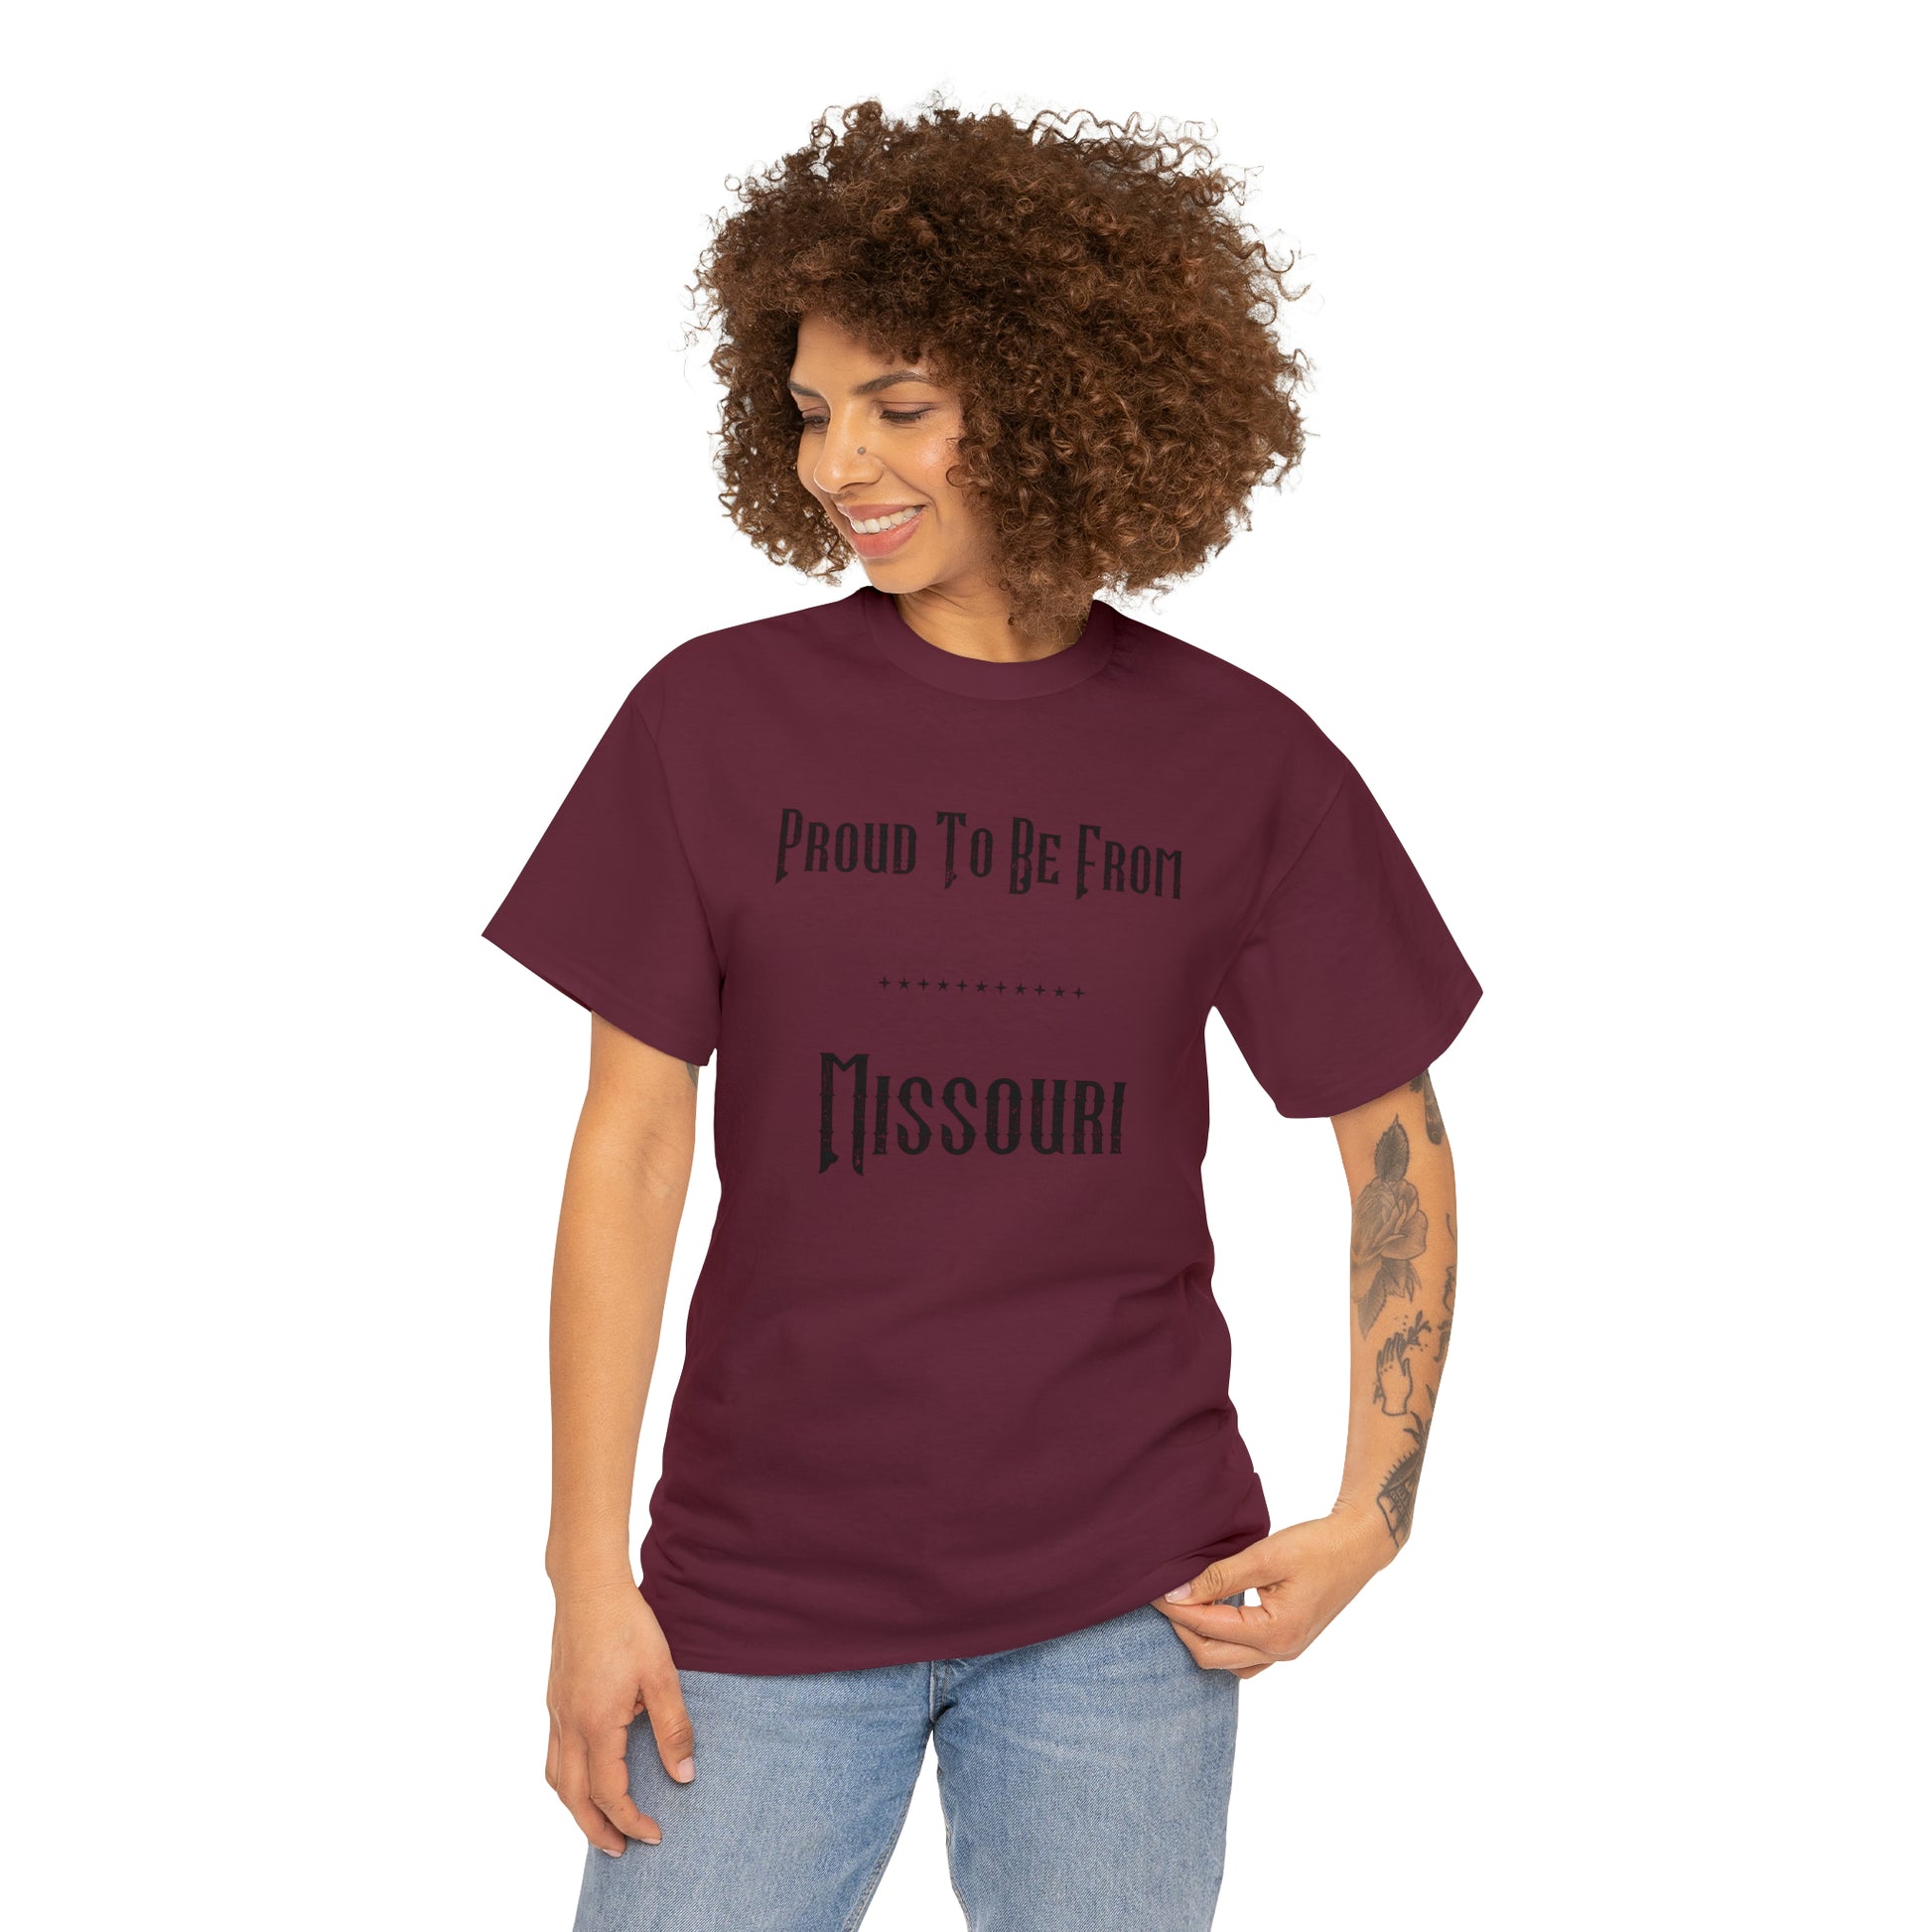 "Proud To Be From Missouri" T-Shirt - Weave Got Gifts - Unique Gifts You Won’t Find Anywhere Else!